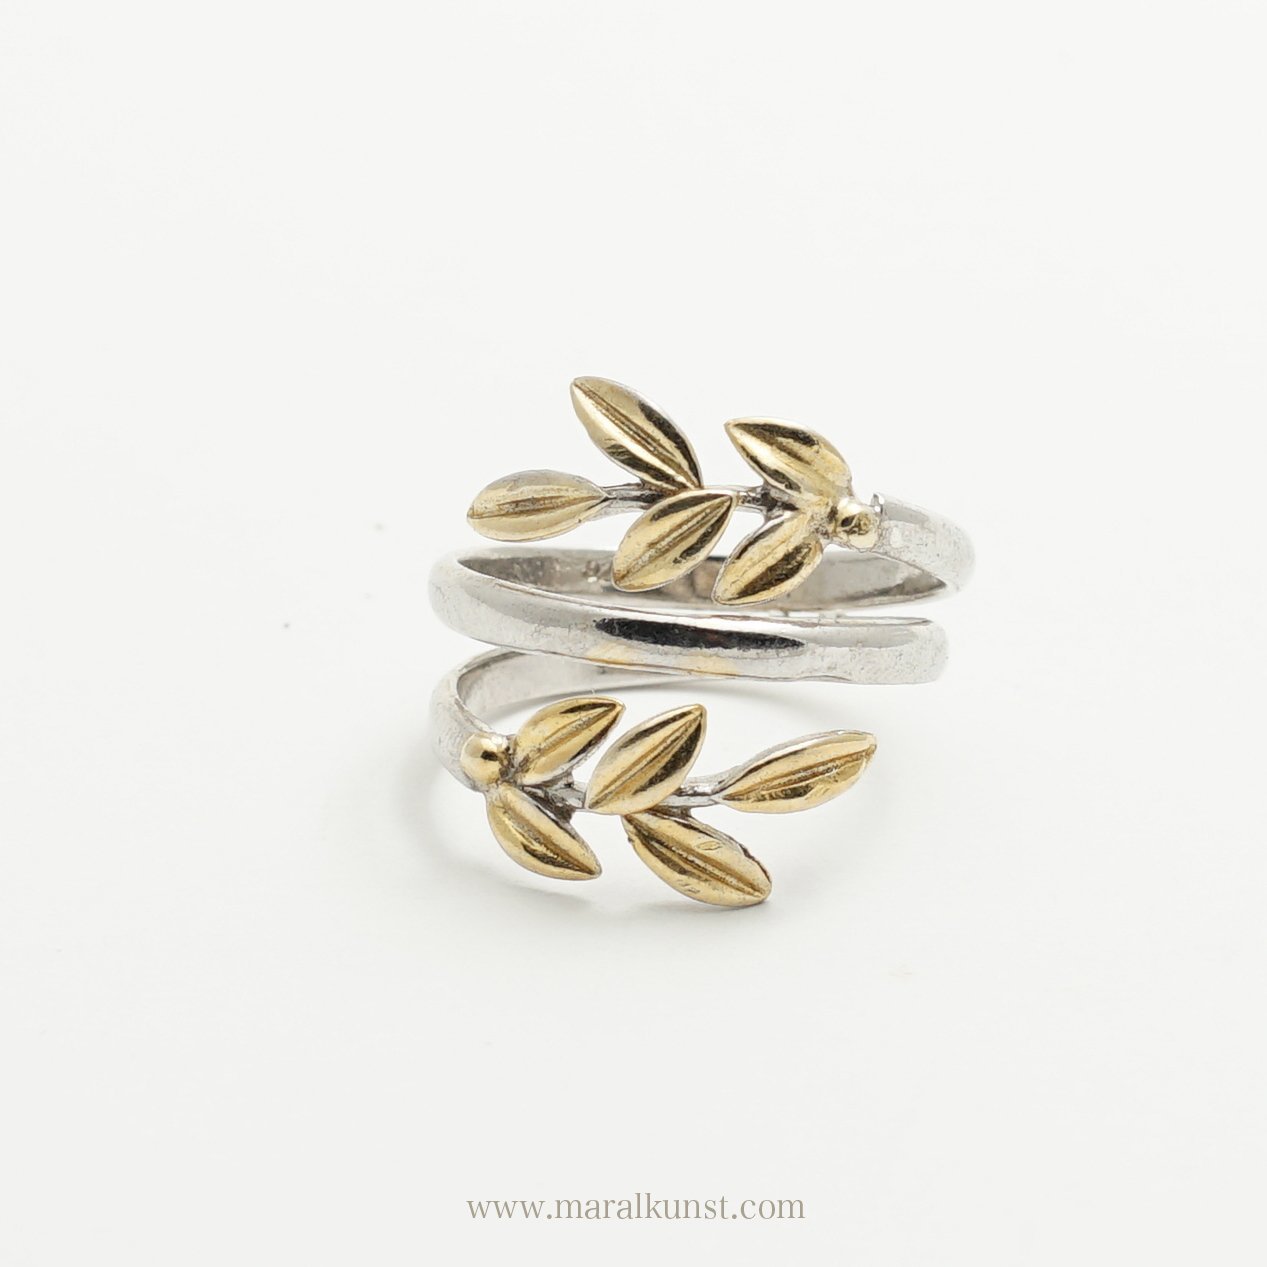 Silver Olive Leaf Ring - Maral Kunst Jewelry